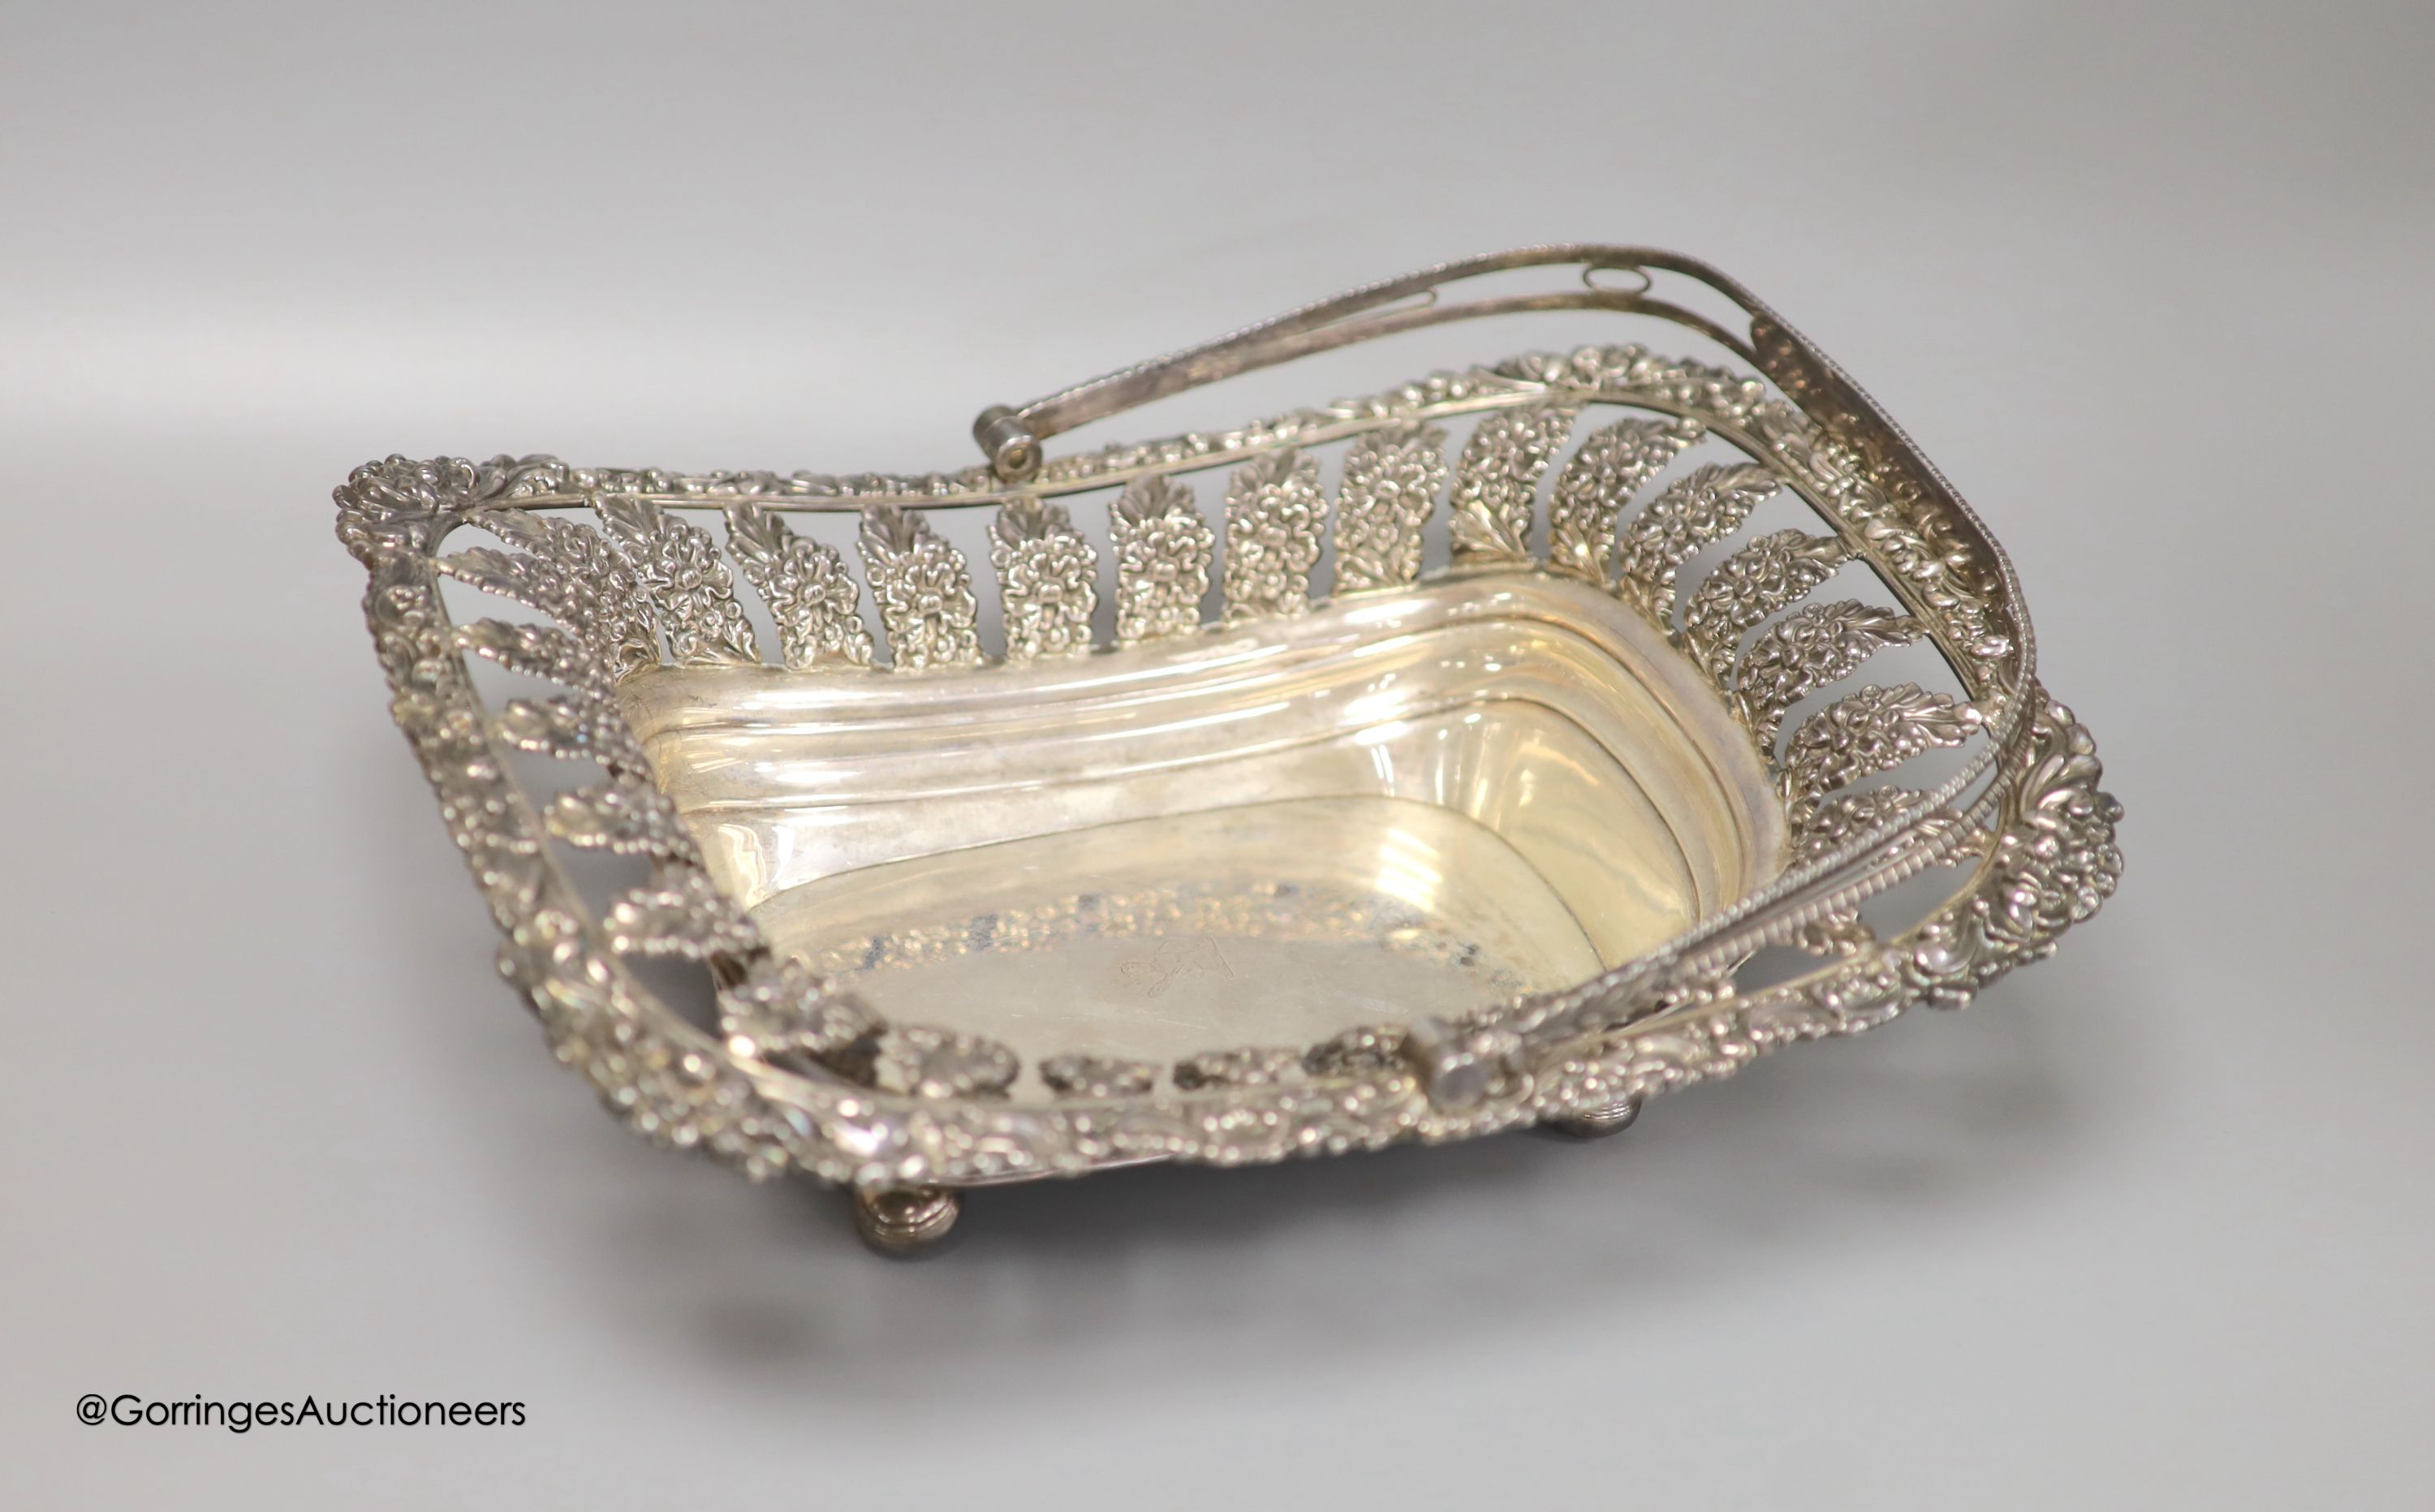 A George III silver swing-handled cake basket with cast and embossed foliate decoration, 28.83oz